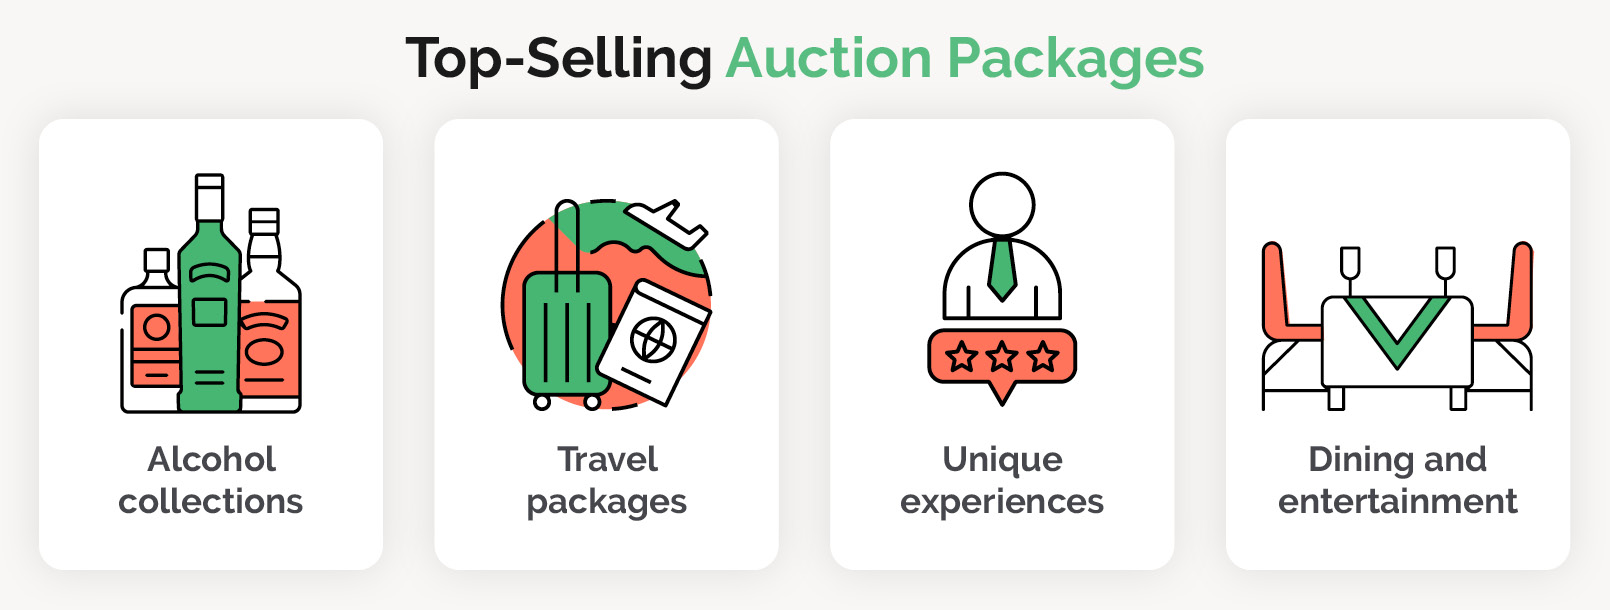 Auction packages like alcohol collections, travel experiences, dining, and entertainment often sell well.